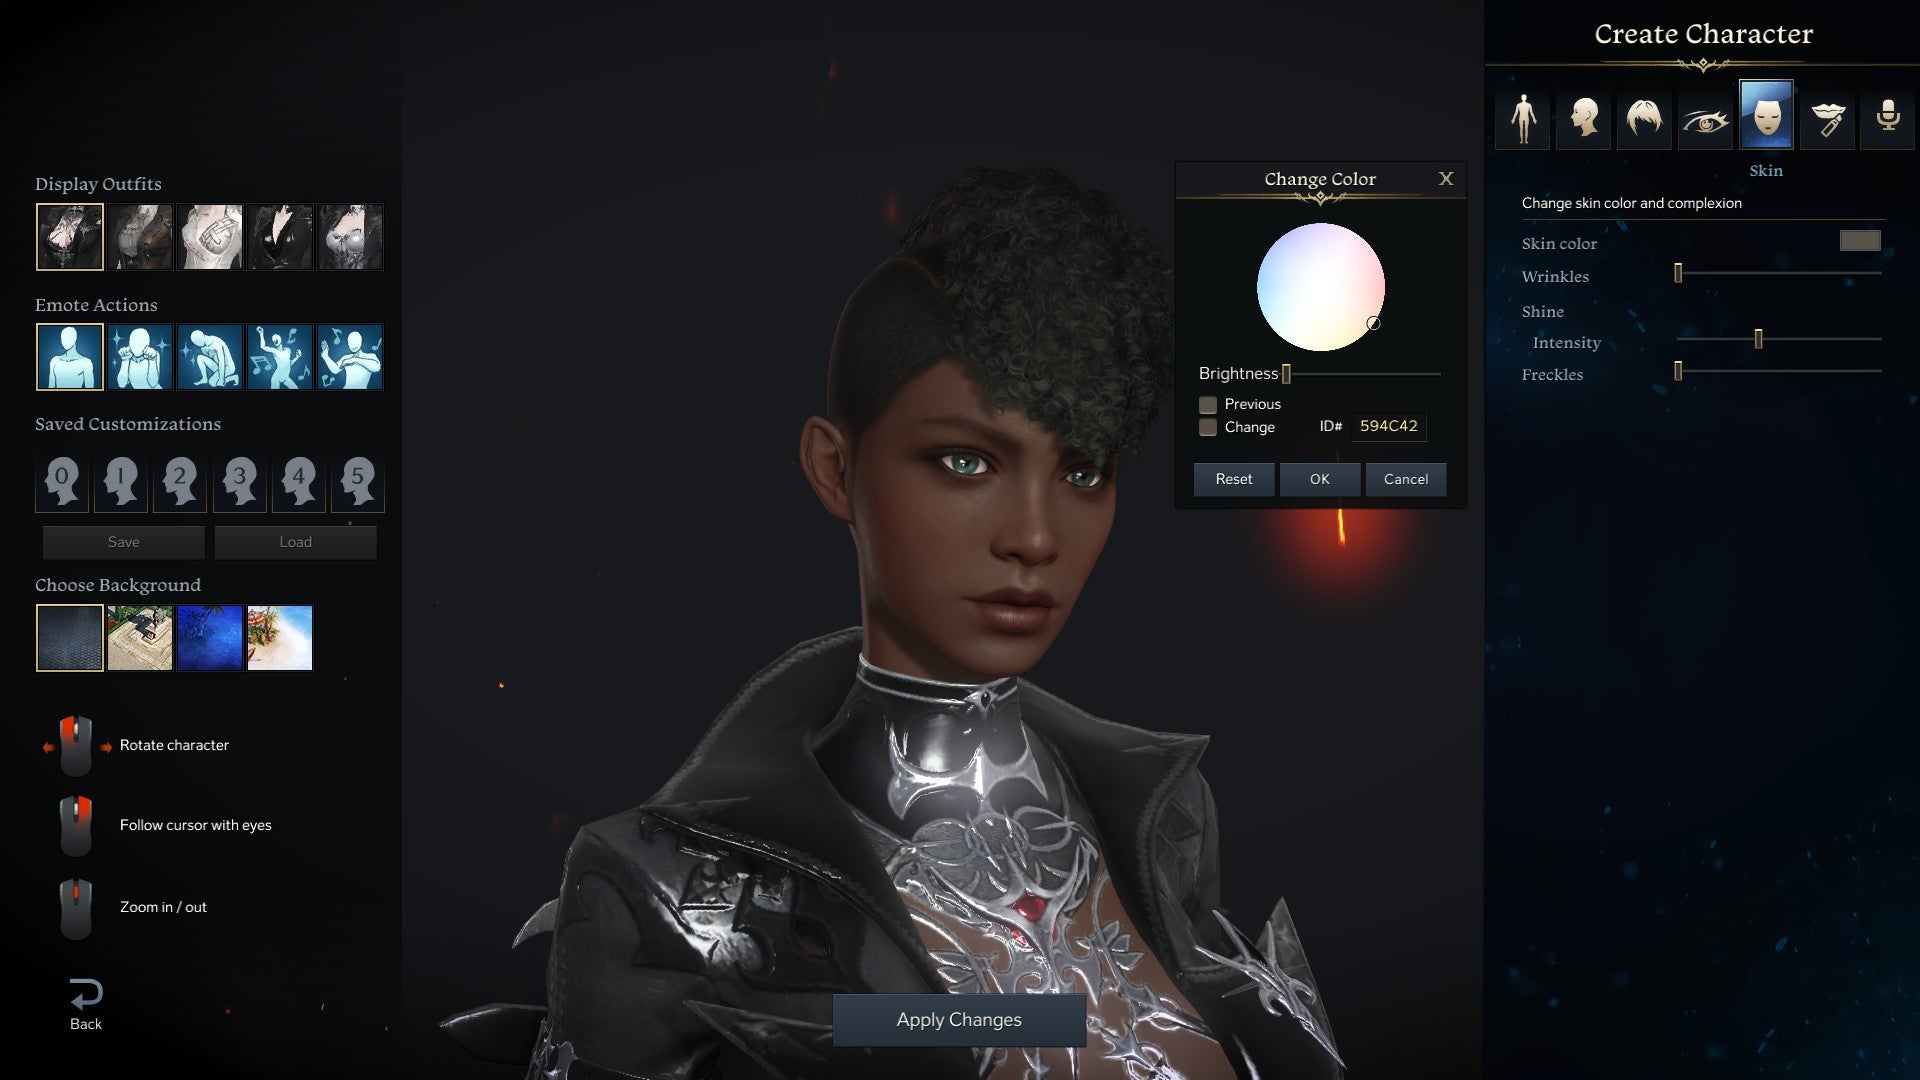 Lost Ark character creator showing Black female character and skin tone options